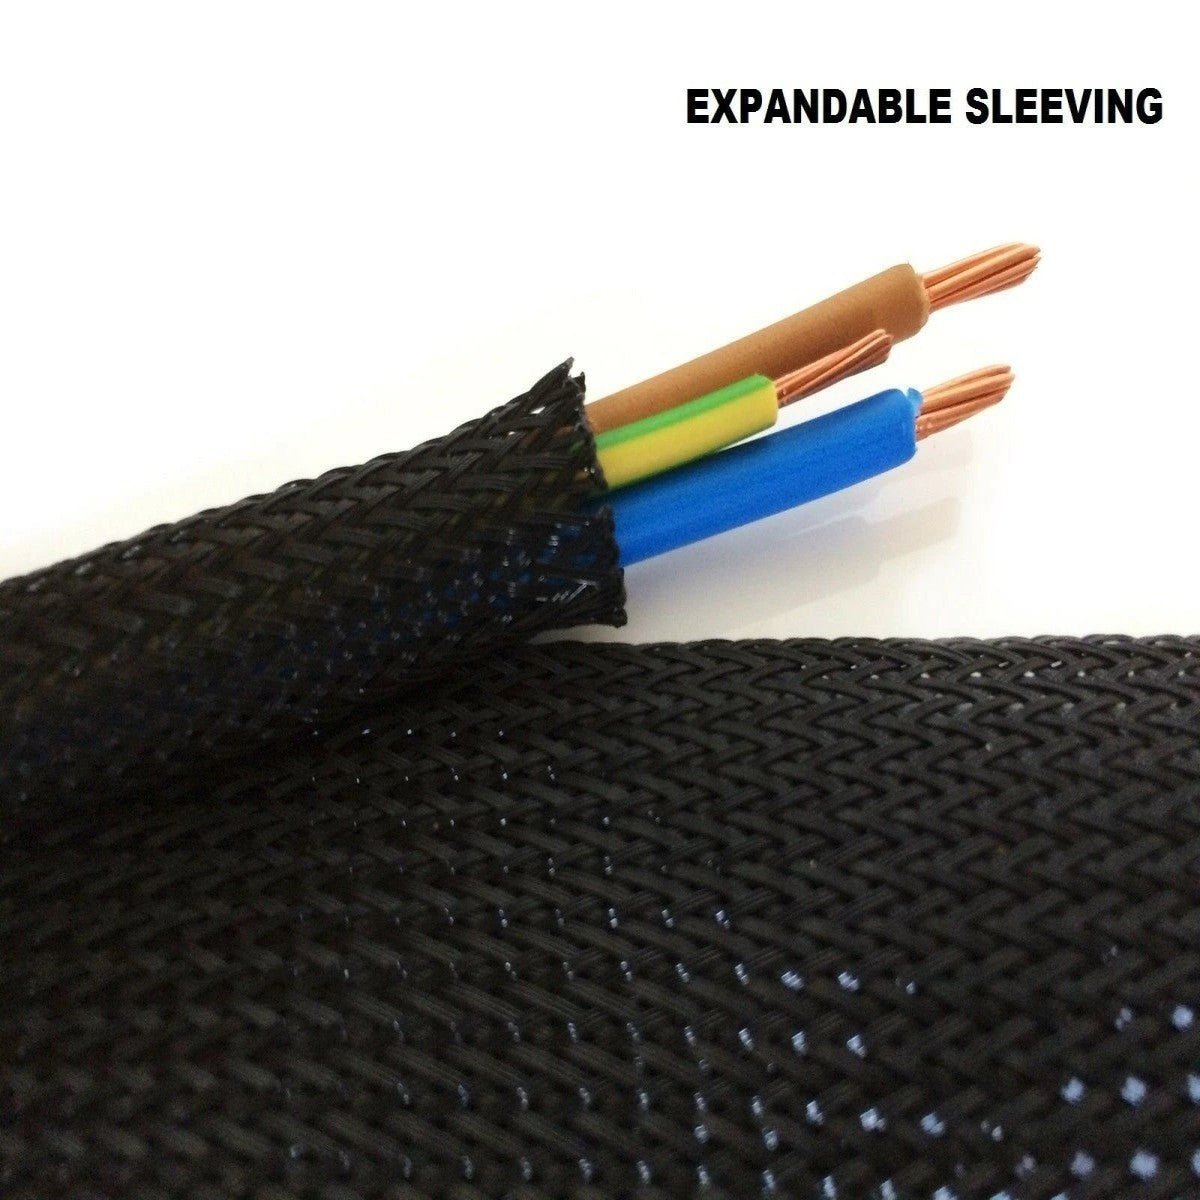 Braided PET Expandable Sleeving Cable Wire Sheath 12mm Diameter 1Meter / 5  Meter